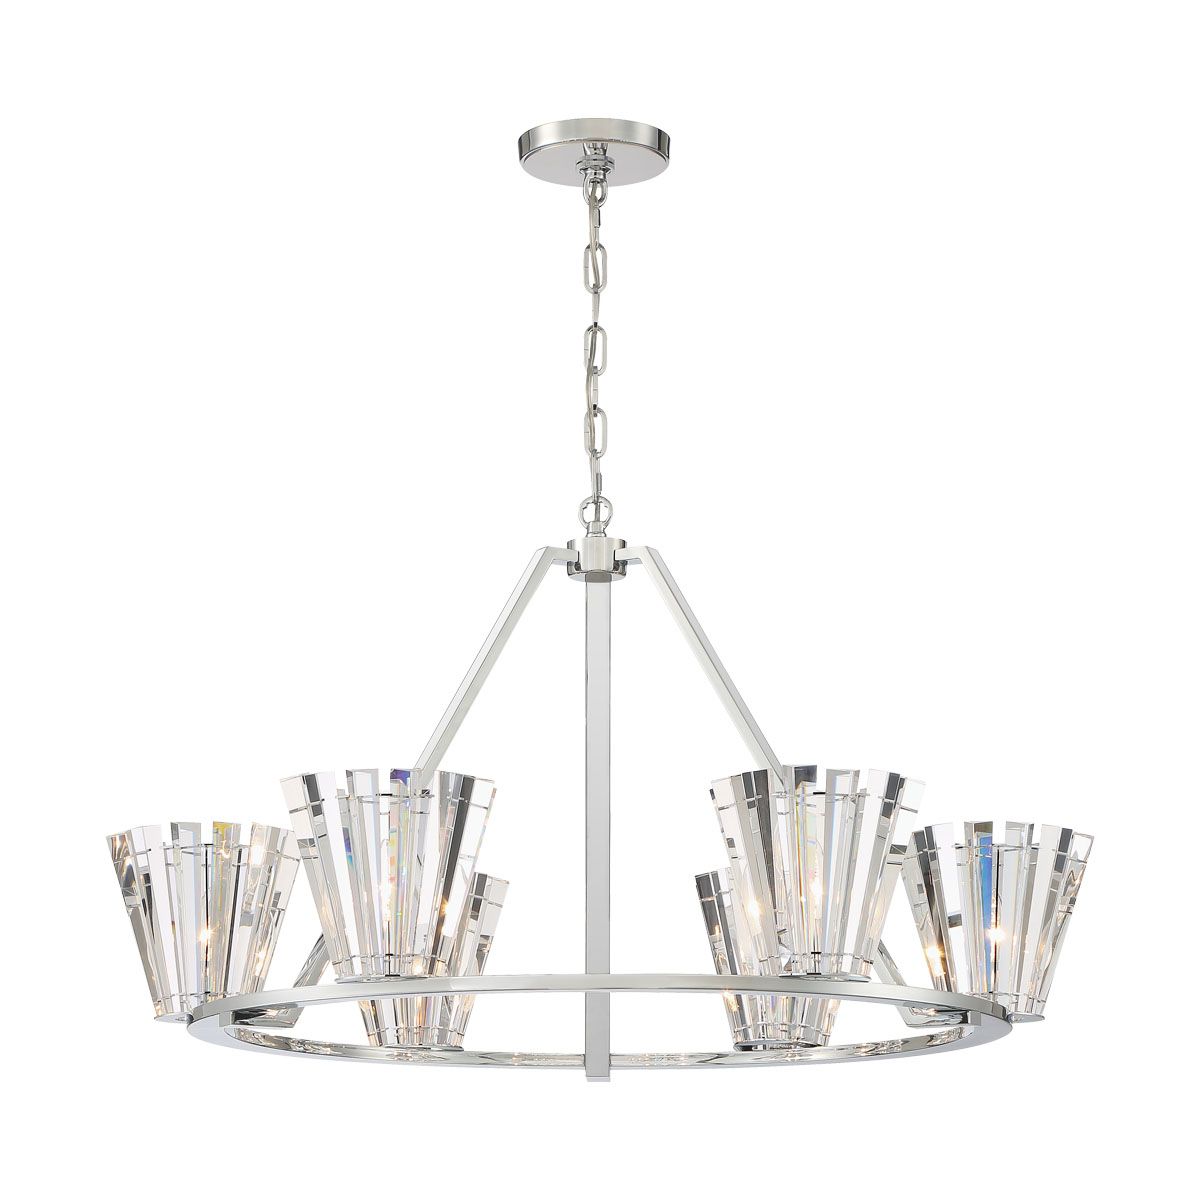 Ricca 37 in. 6 Lights Chandelier Silver finish